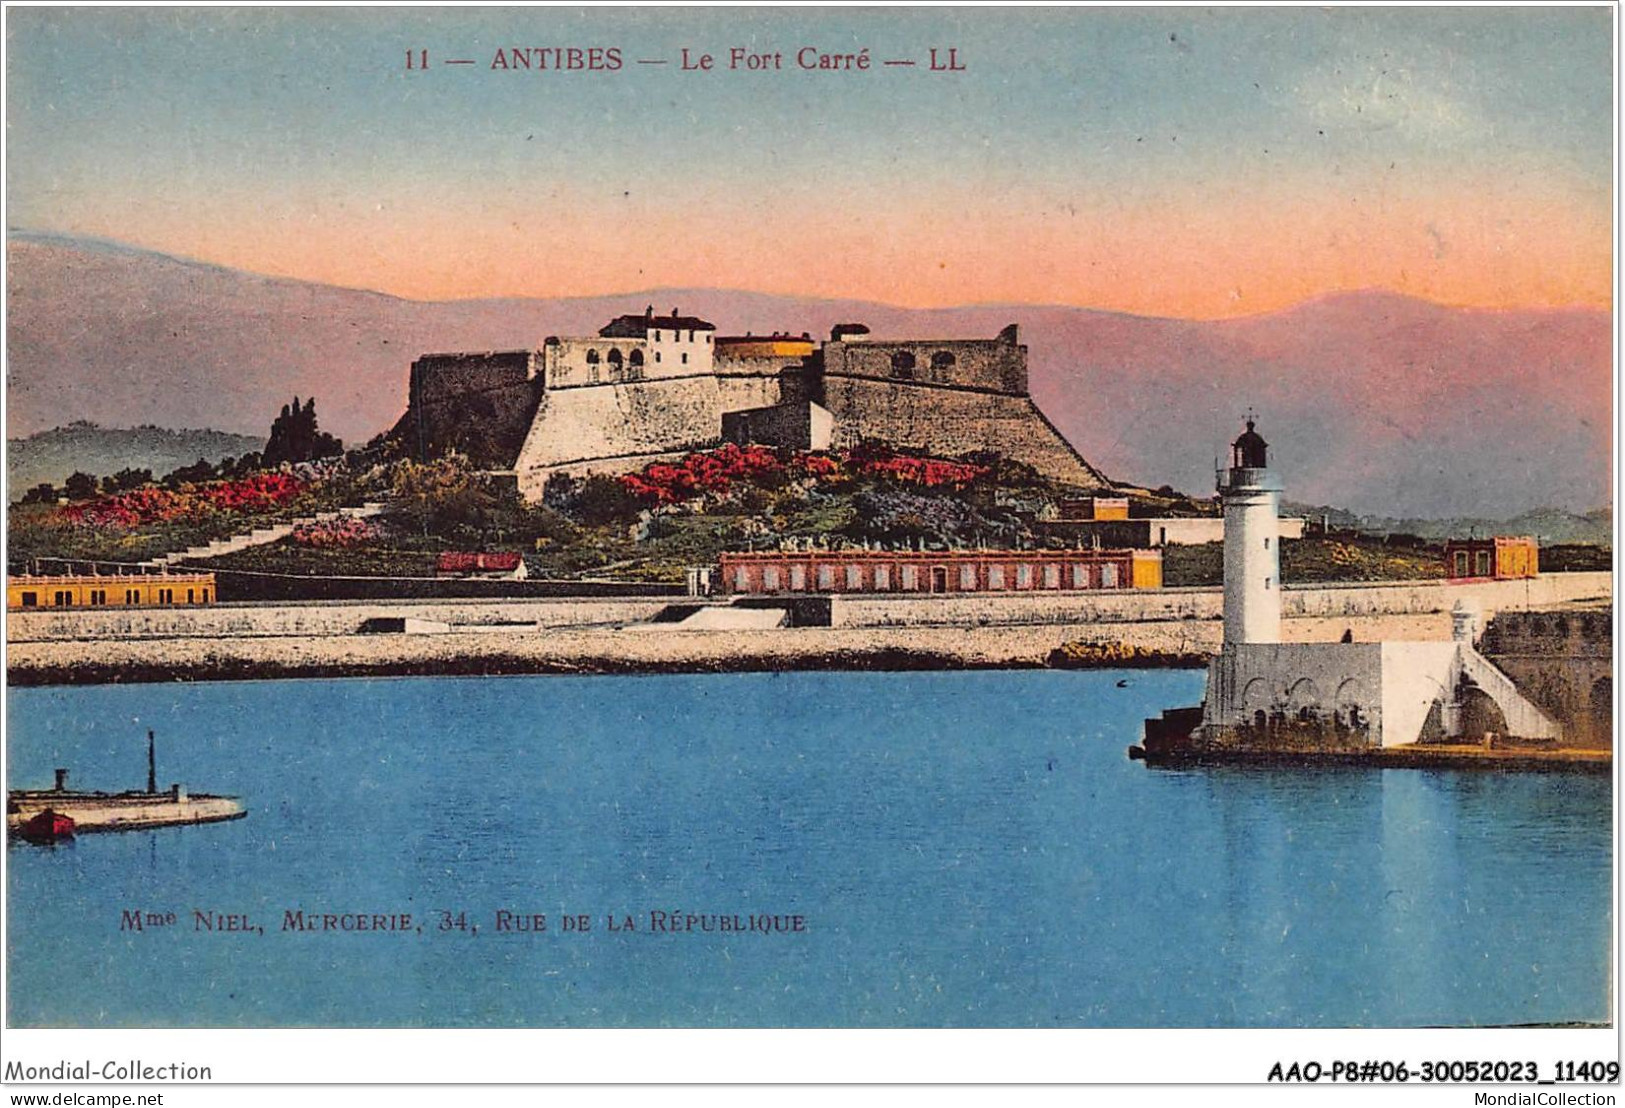 AAOP8-06-0659 - ANTIBES - Le Fort Carré - Antibes - Vieille Ville